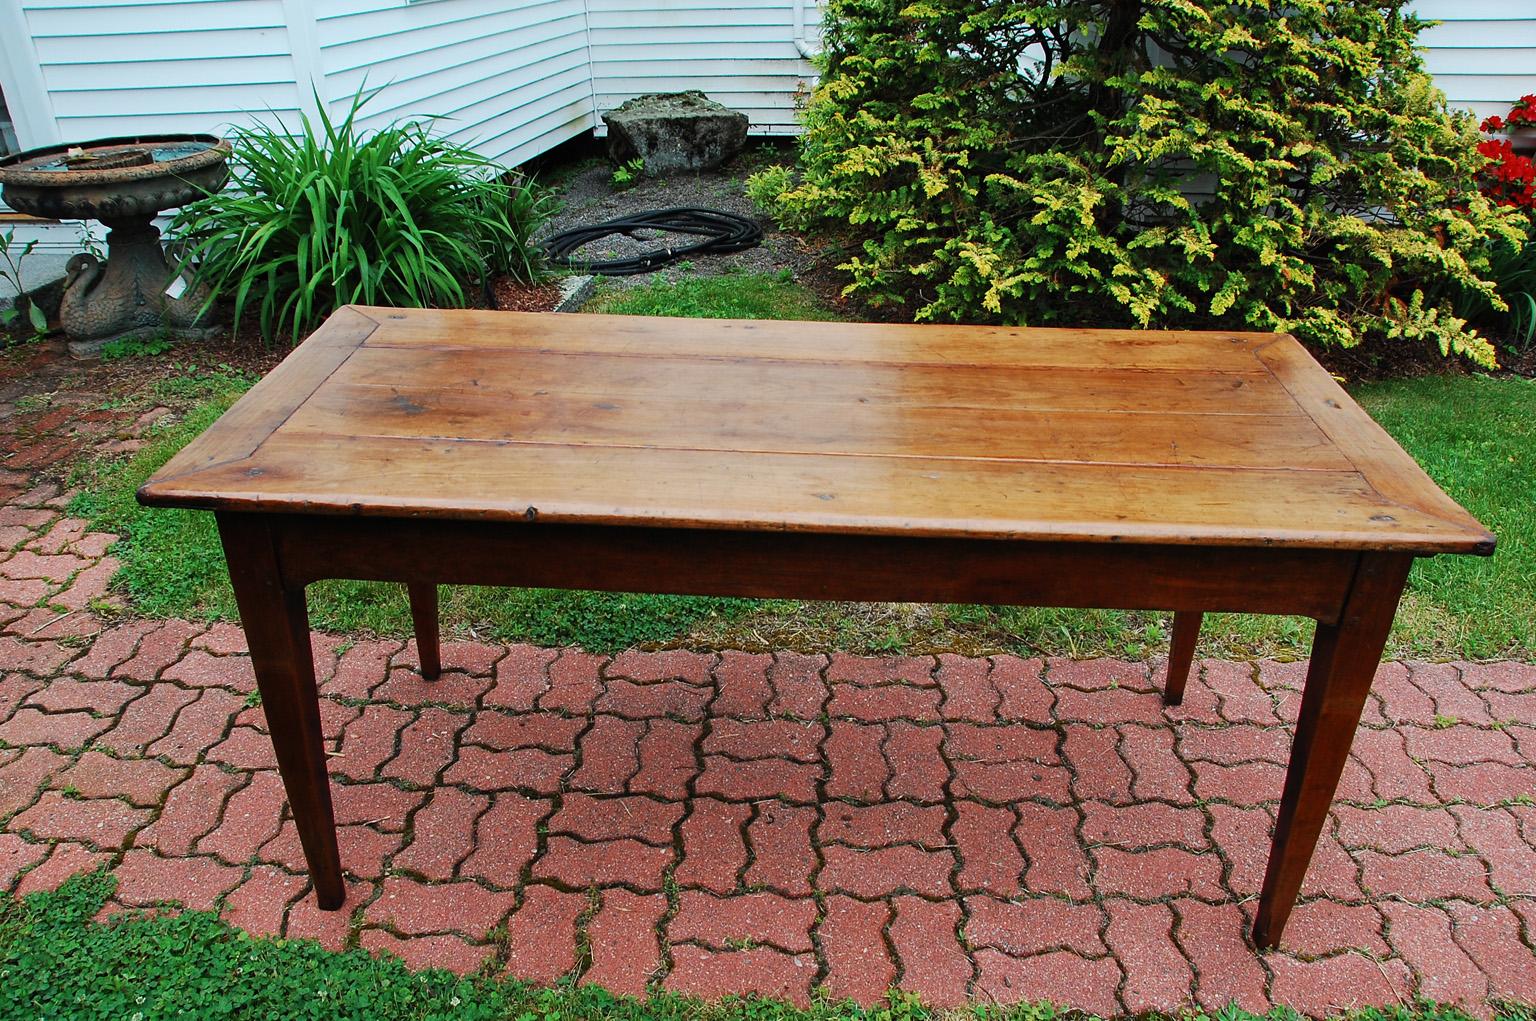 French provincial cherry farmhouse table , sixty six inches long, with tapered legs, one drawer and slide out chestnut bread slide.  The twenty nine inch long bread slide can be used as additional serving space, or slicing bread during the meal, or